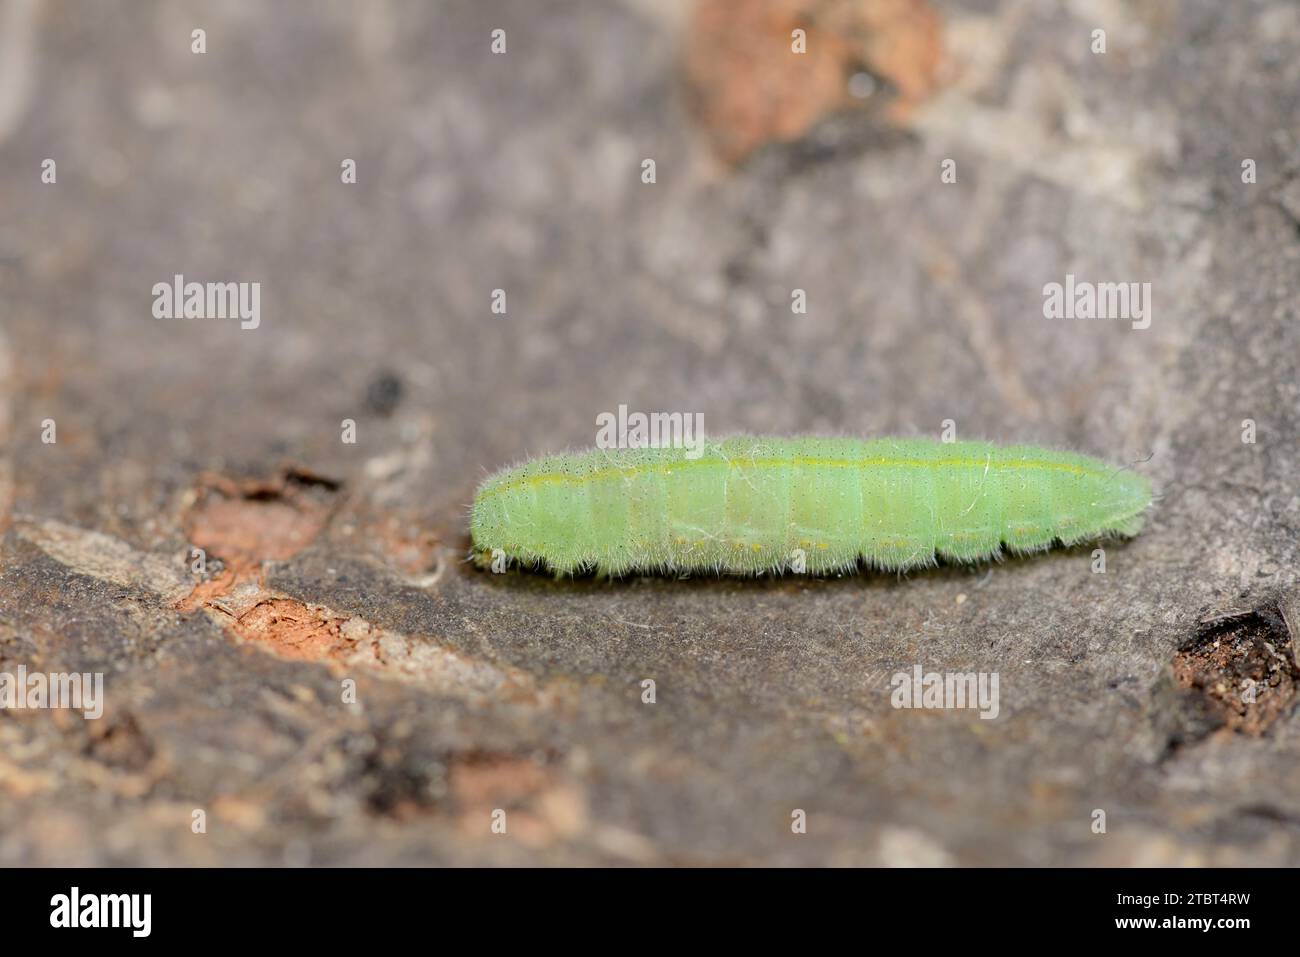 Small cabbage white butterfly (Pieris rapae), caterpillar shortly before pupation, North Rhine-Westphalia, Germany Stock Photo